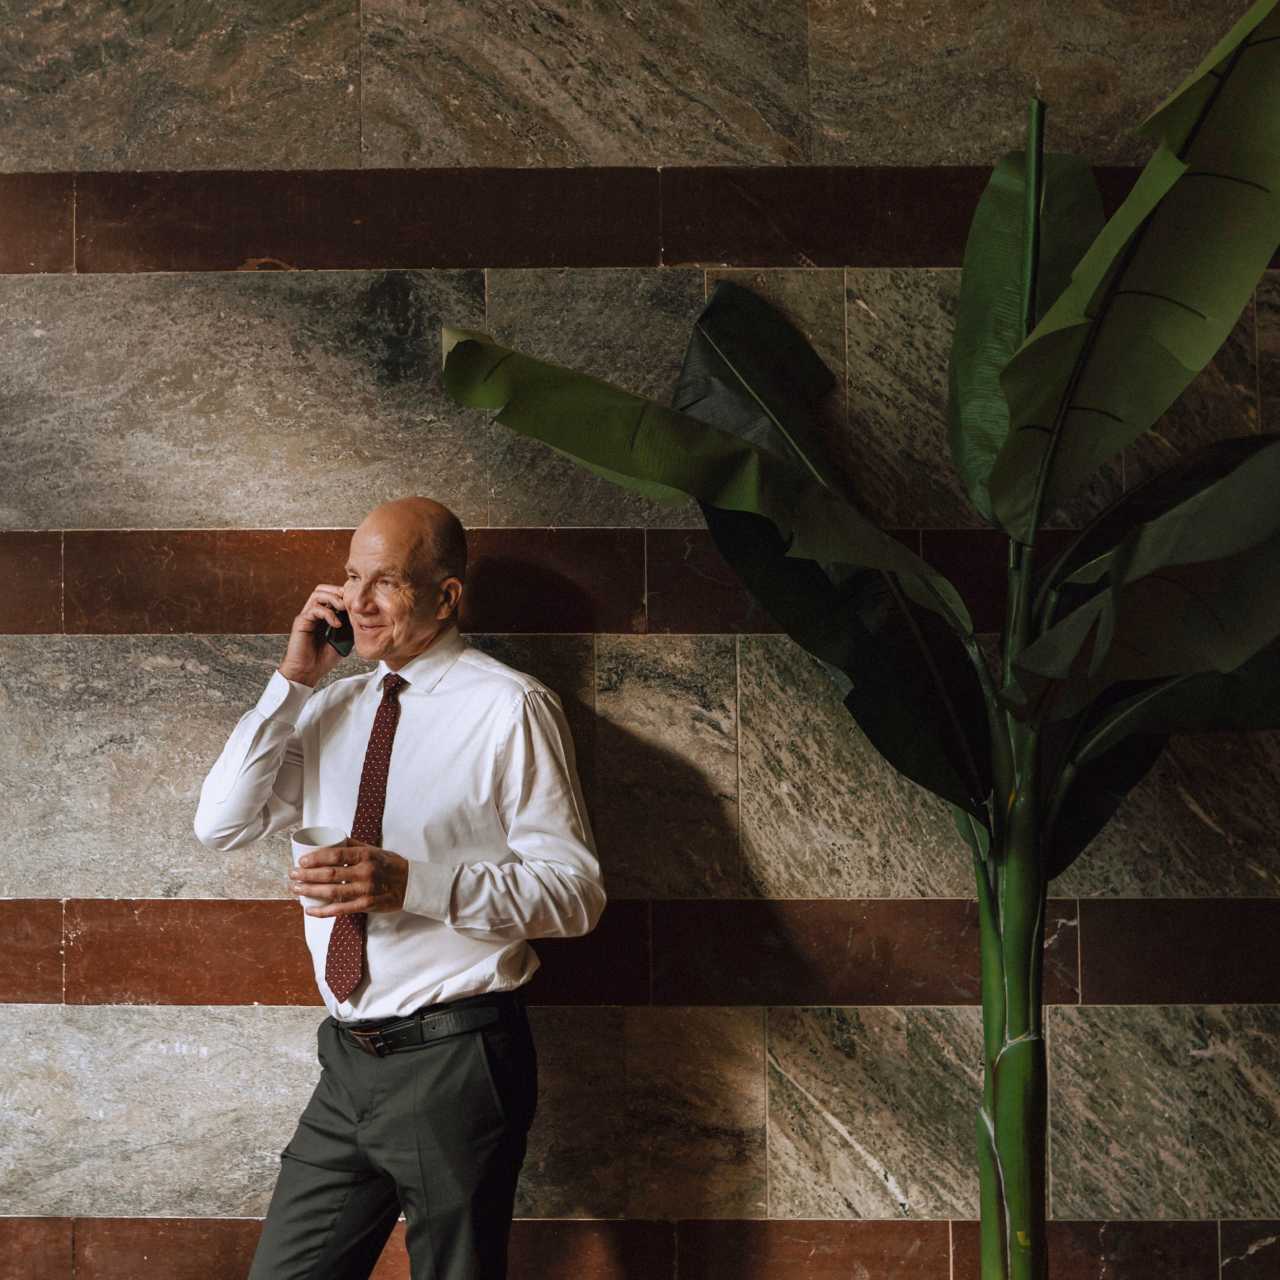 Man in a white button up shirt and red tie on phone standing in front of wood and granite striped wall with large plant to his right-hand side.